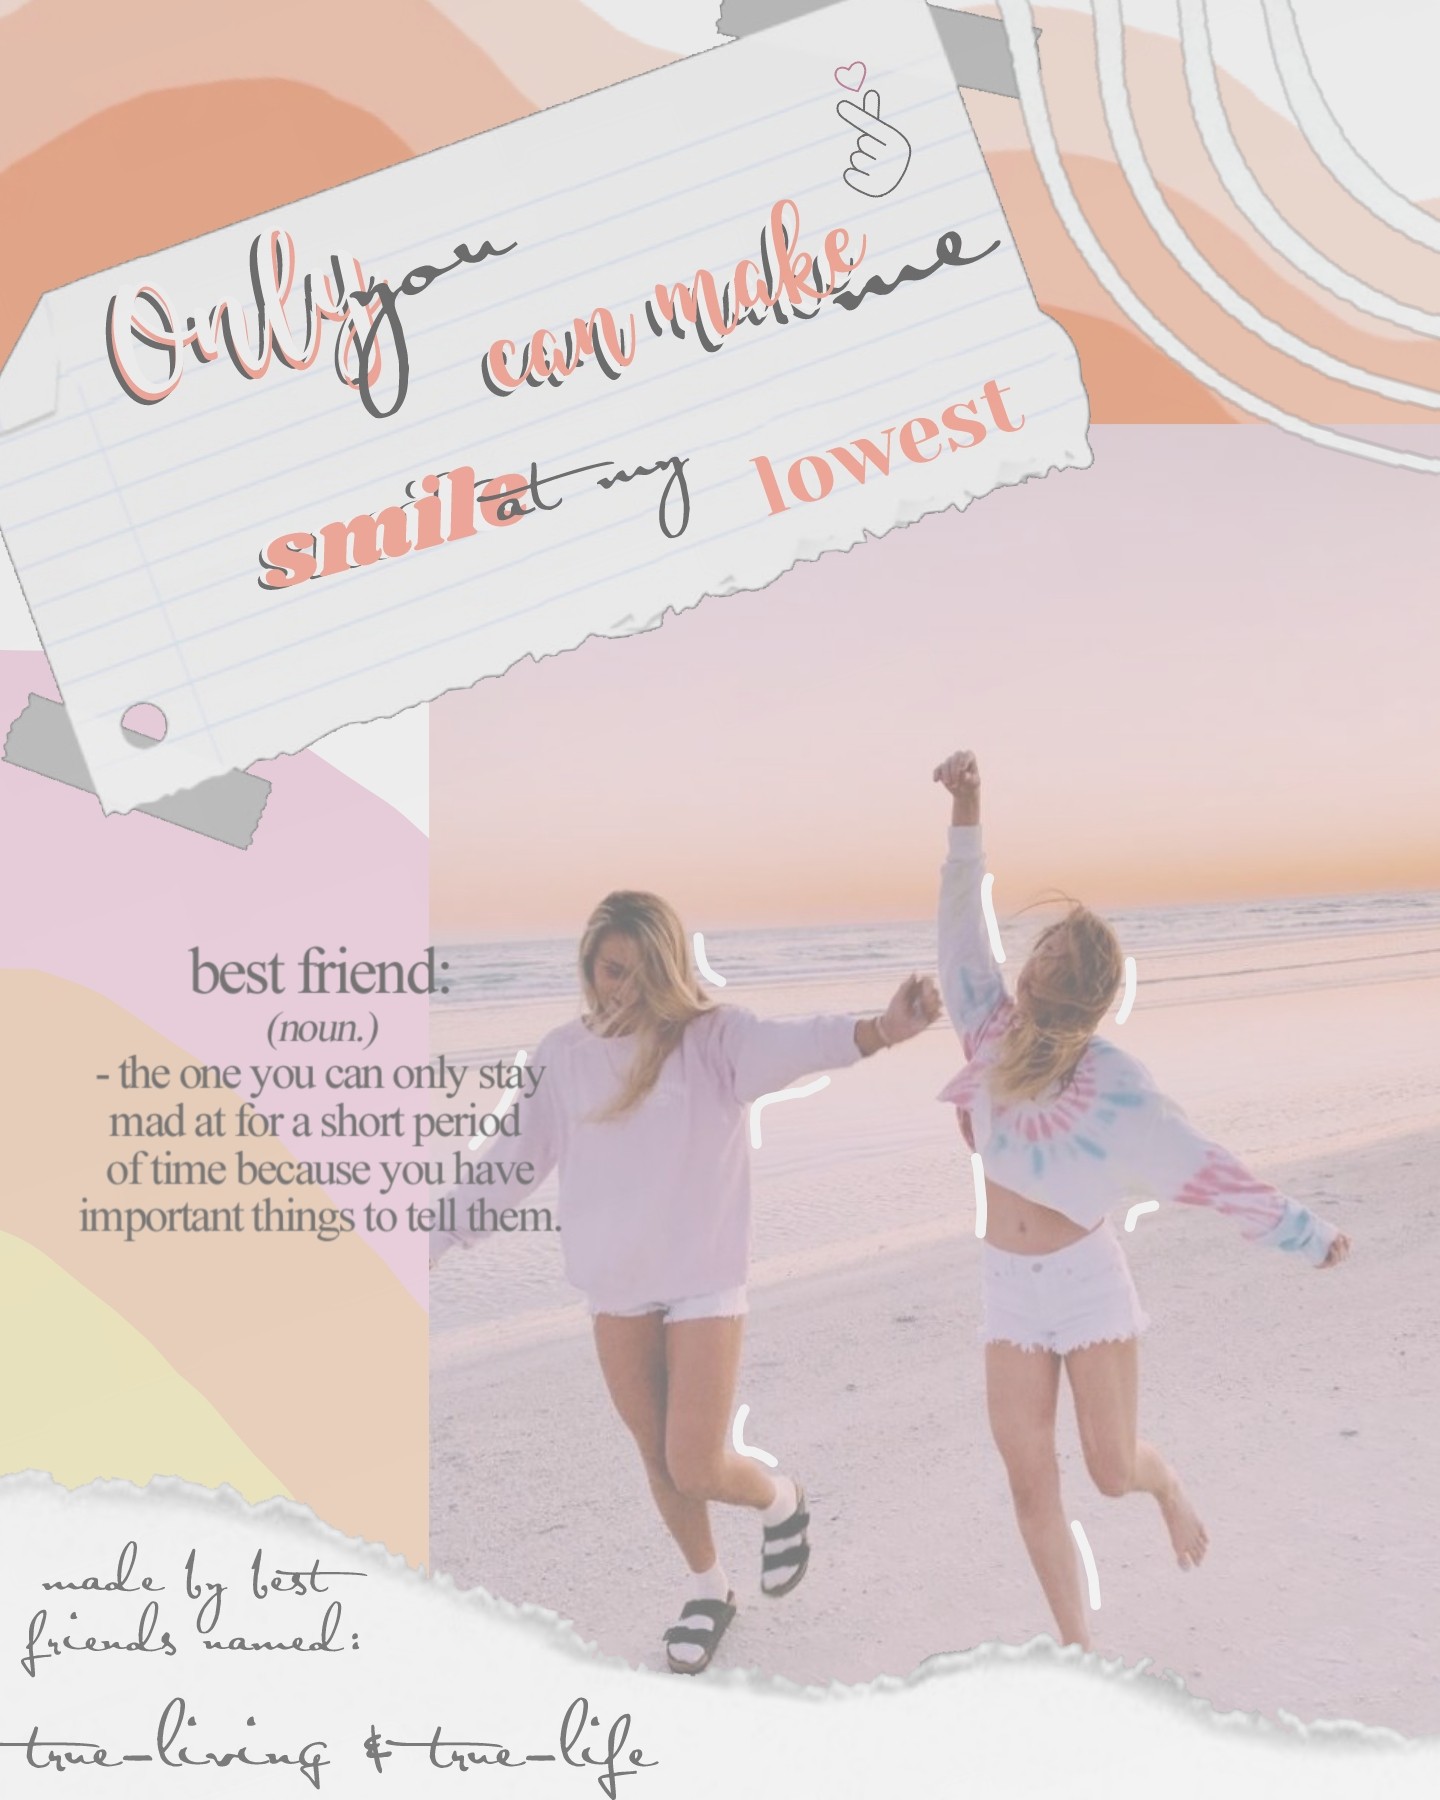 ☁️tap🧸
this was a collab with ma bestie! we made it at our weekly Saturday sleepover! she did the AWESOME bg! and I did the text! enjoy 😉 